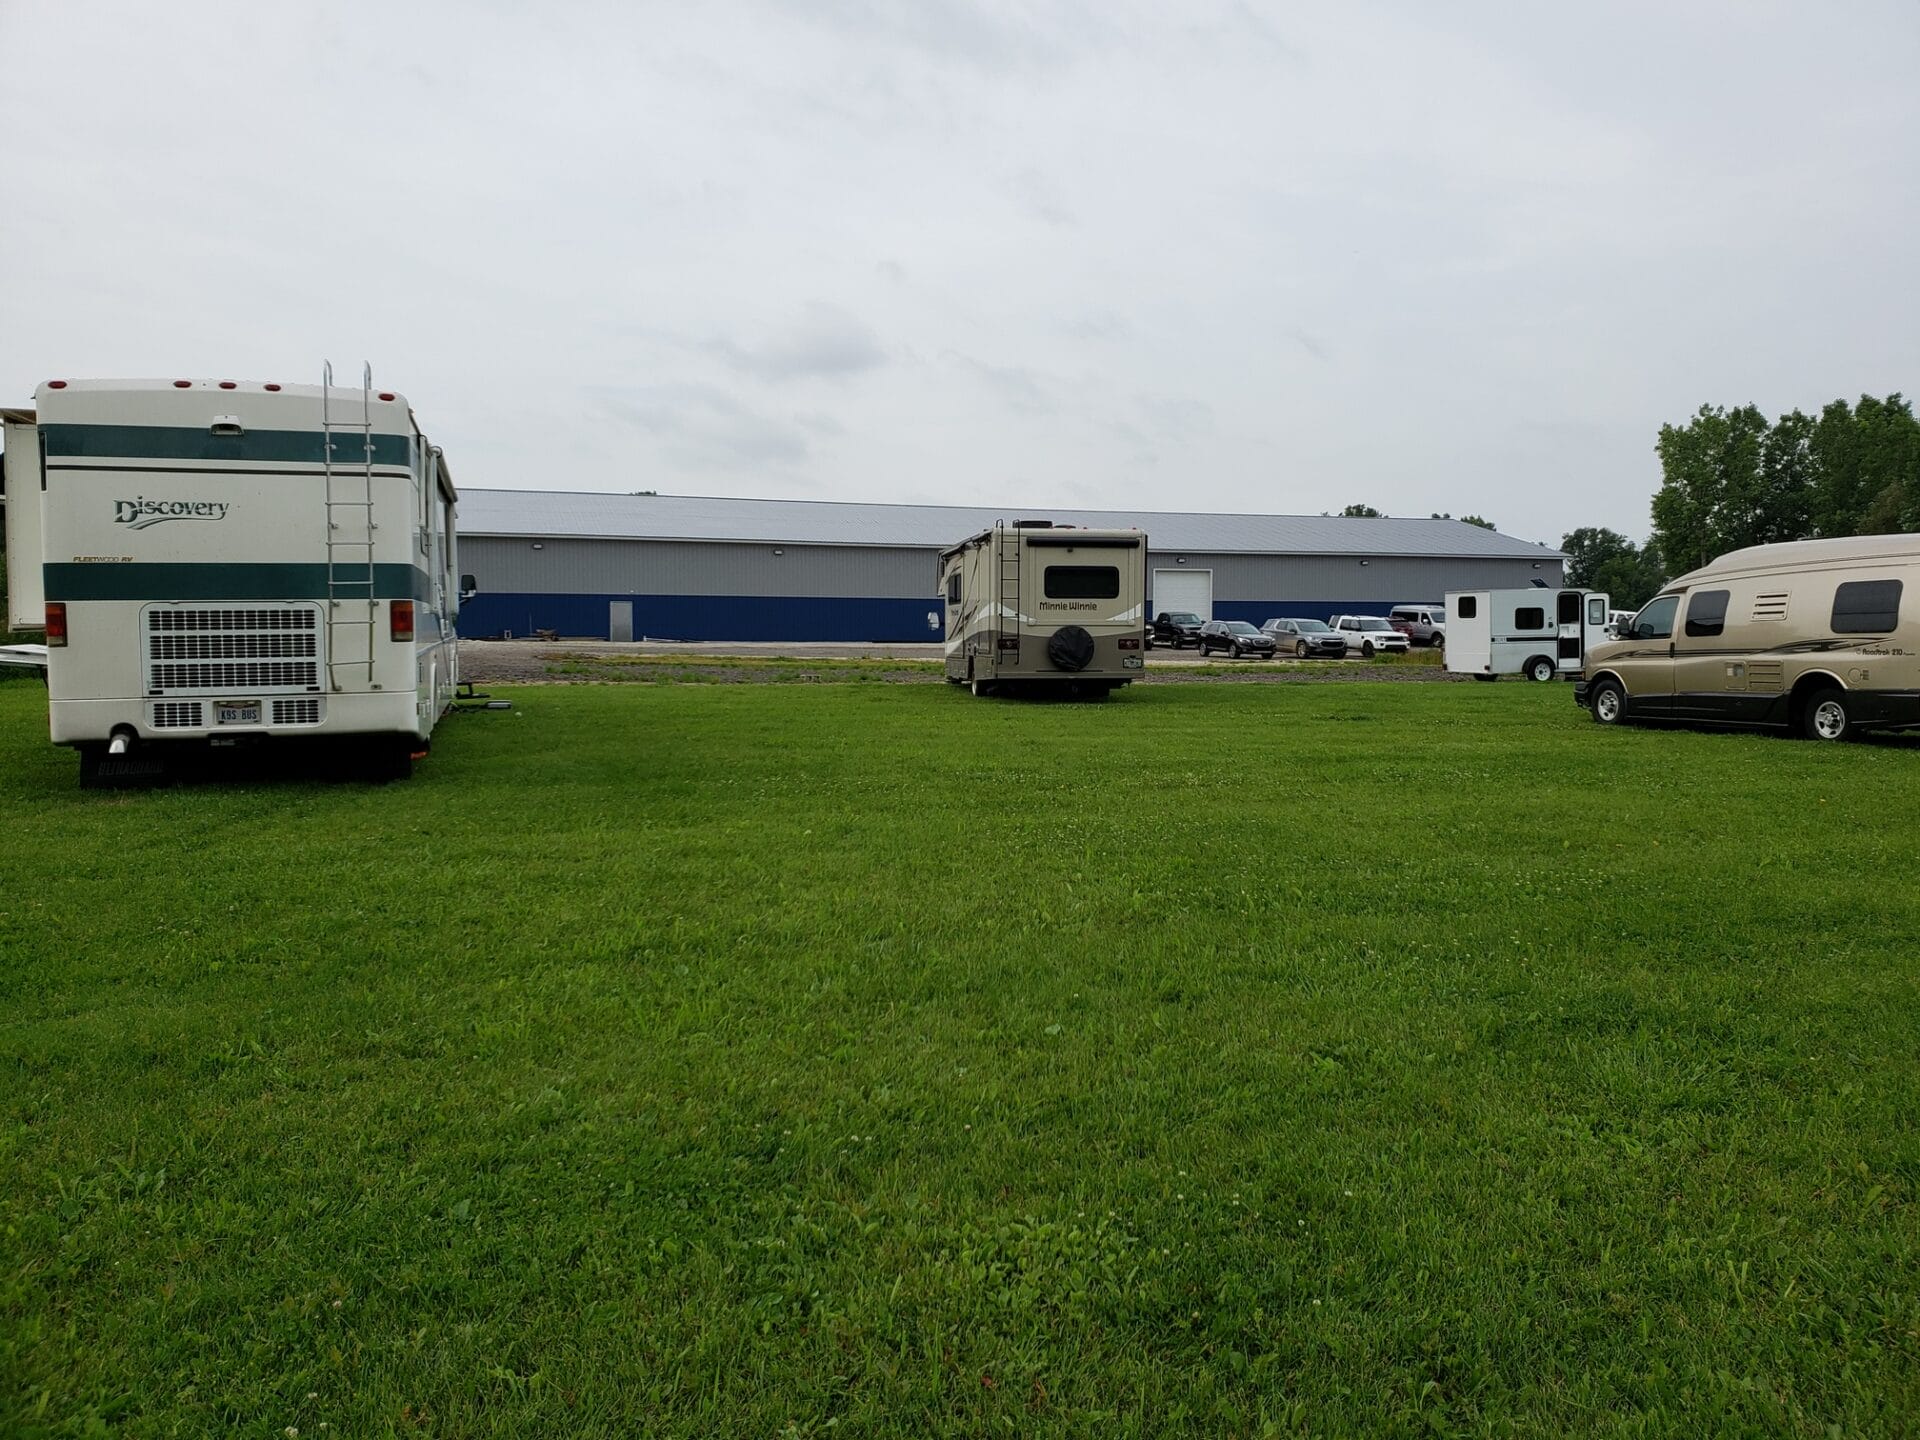 three RVs and a trailer parked on grass in front of All Dogs Can, Lapeer MI